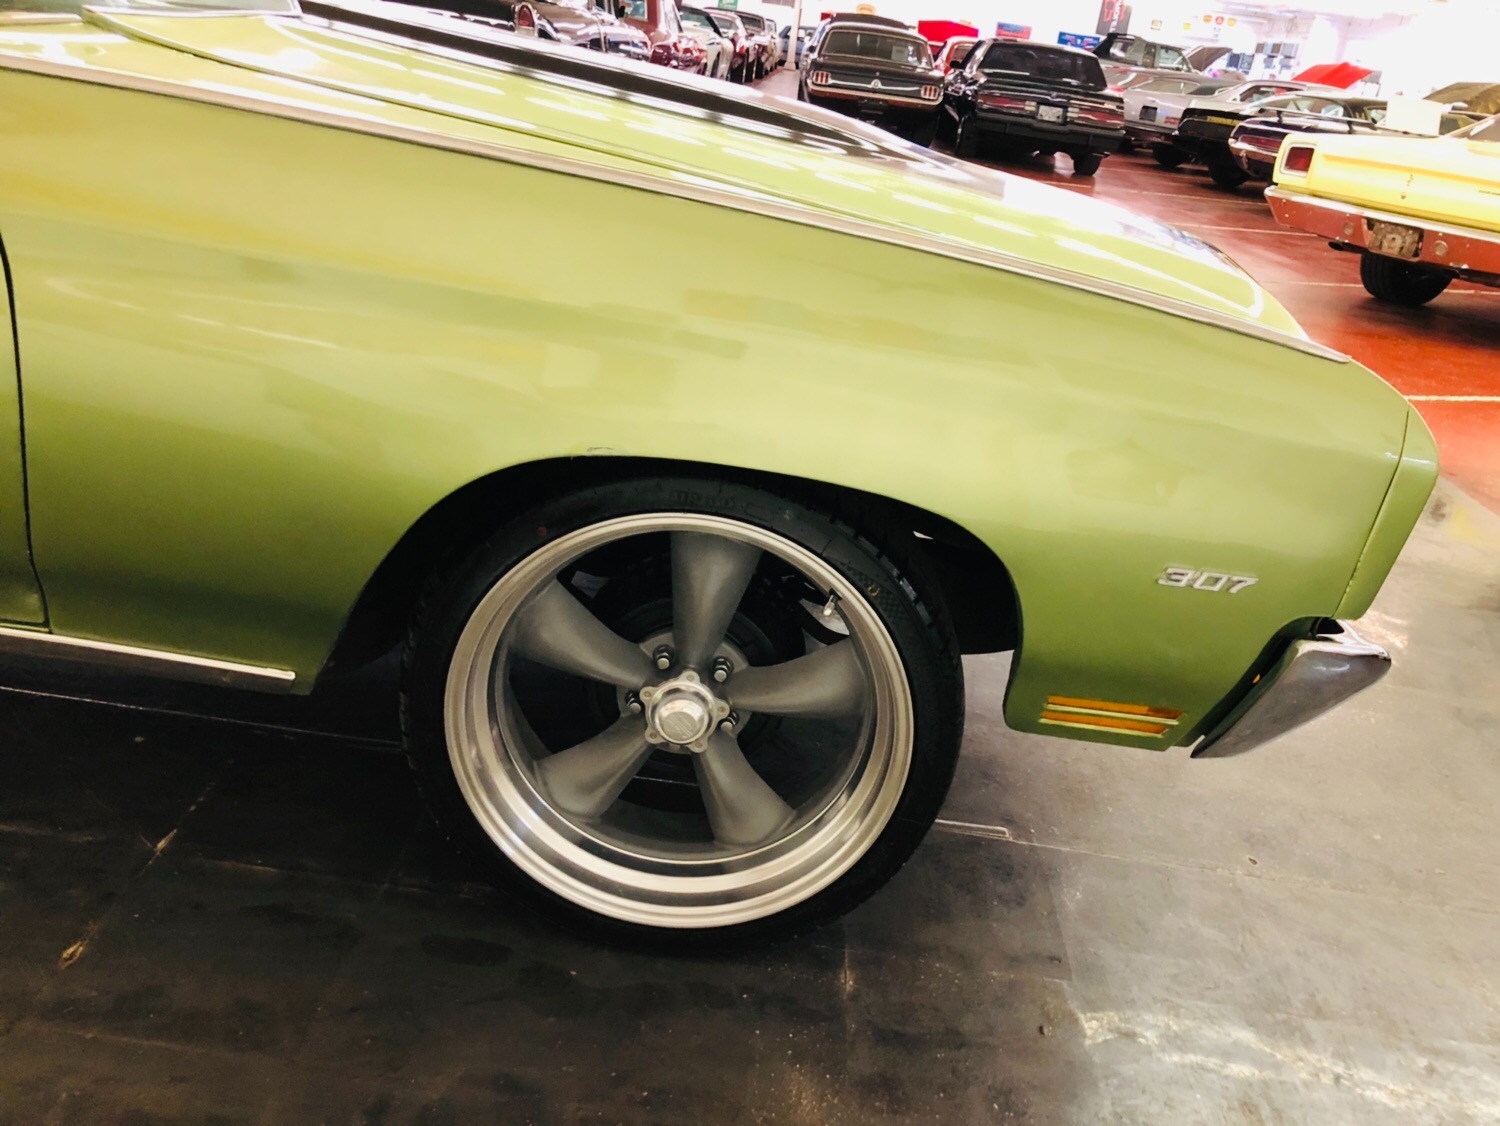 Used 1970 Chevrolet Chevelle -MALIBU V8 SOUTHERN TENNESSEE CLASSIC MUSCLE CAR-SEE VIDEO | Mundelein, IL